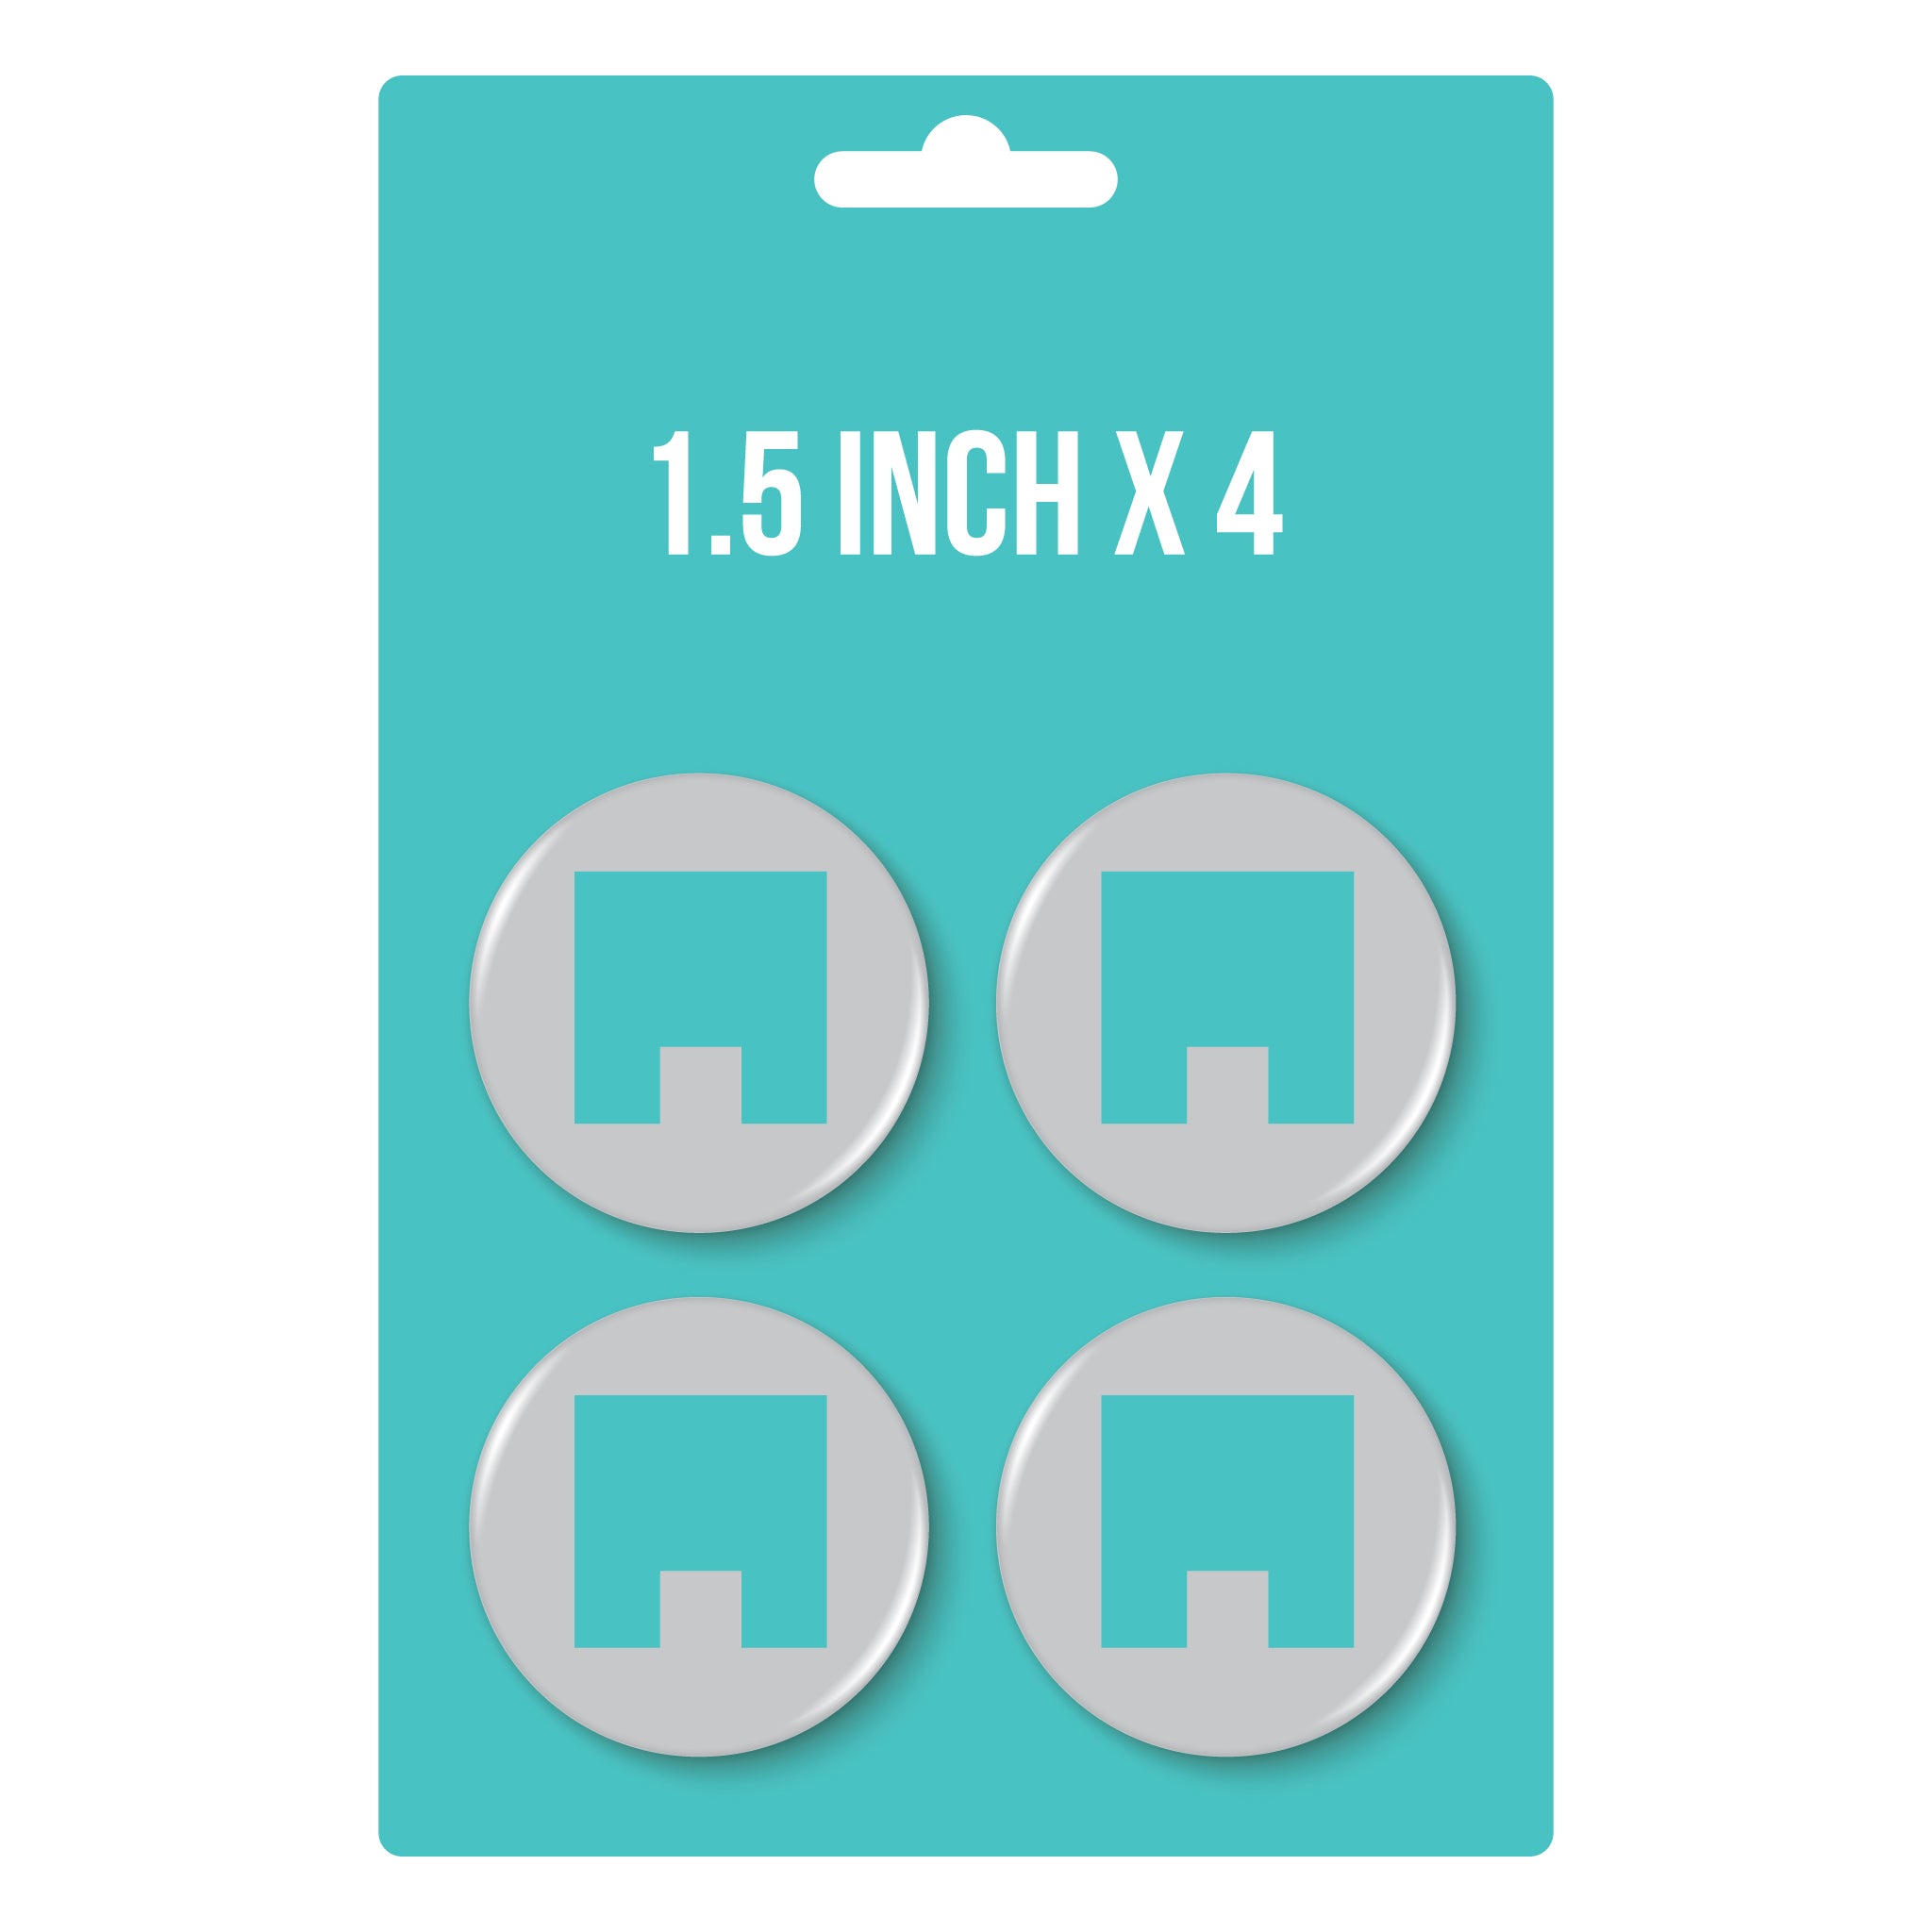 1.5" x 4 Button Pack